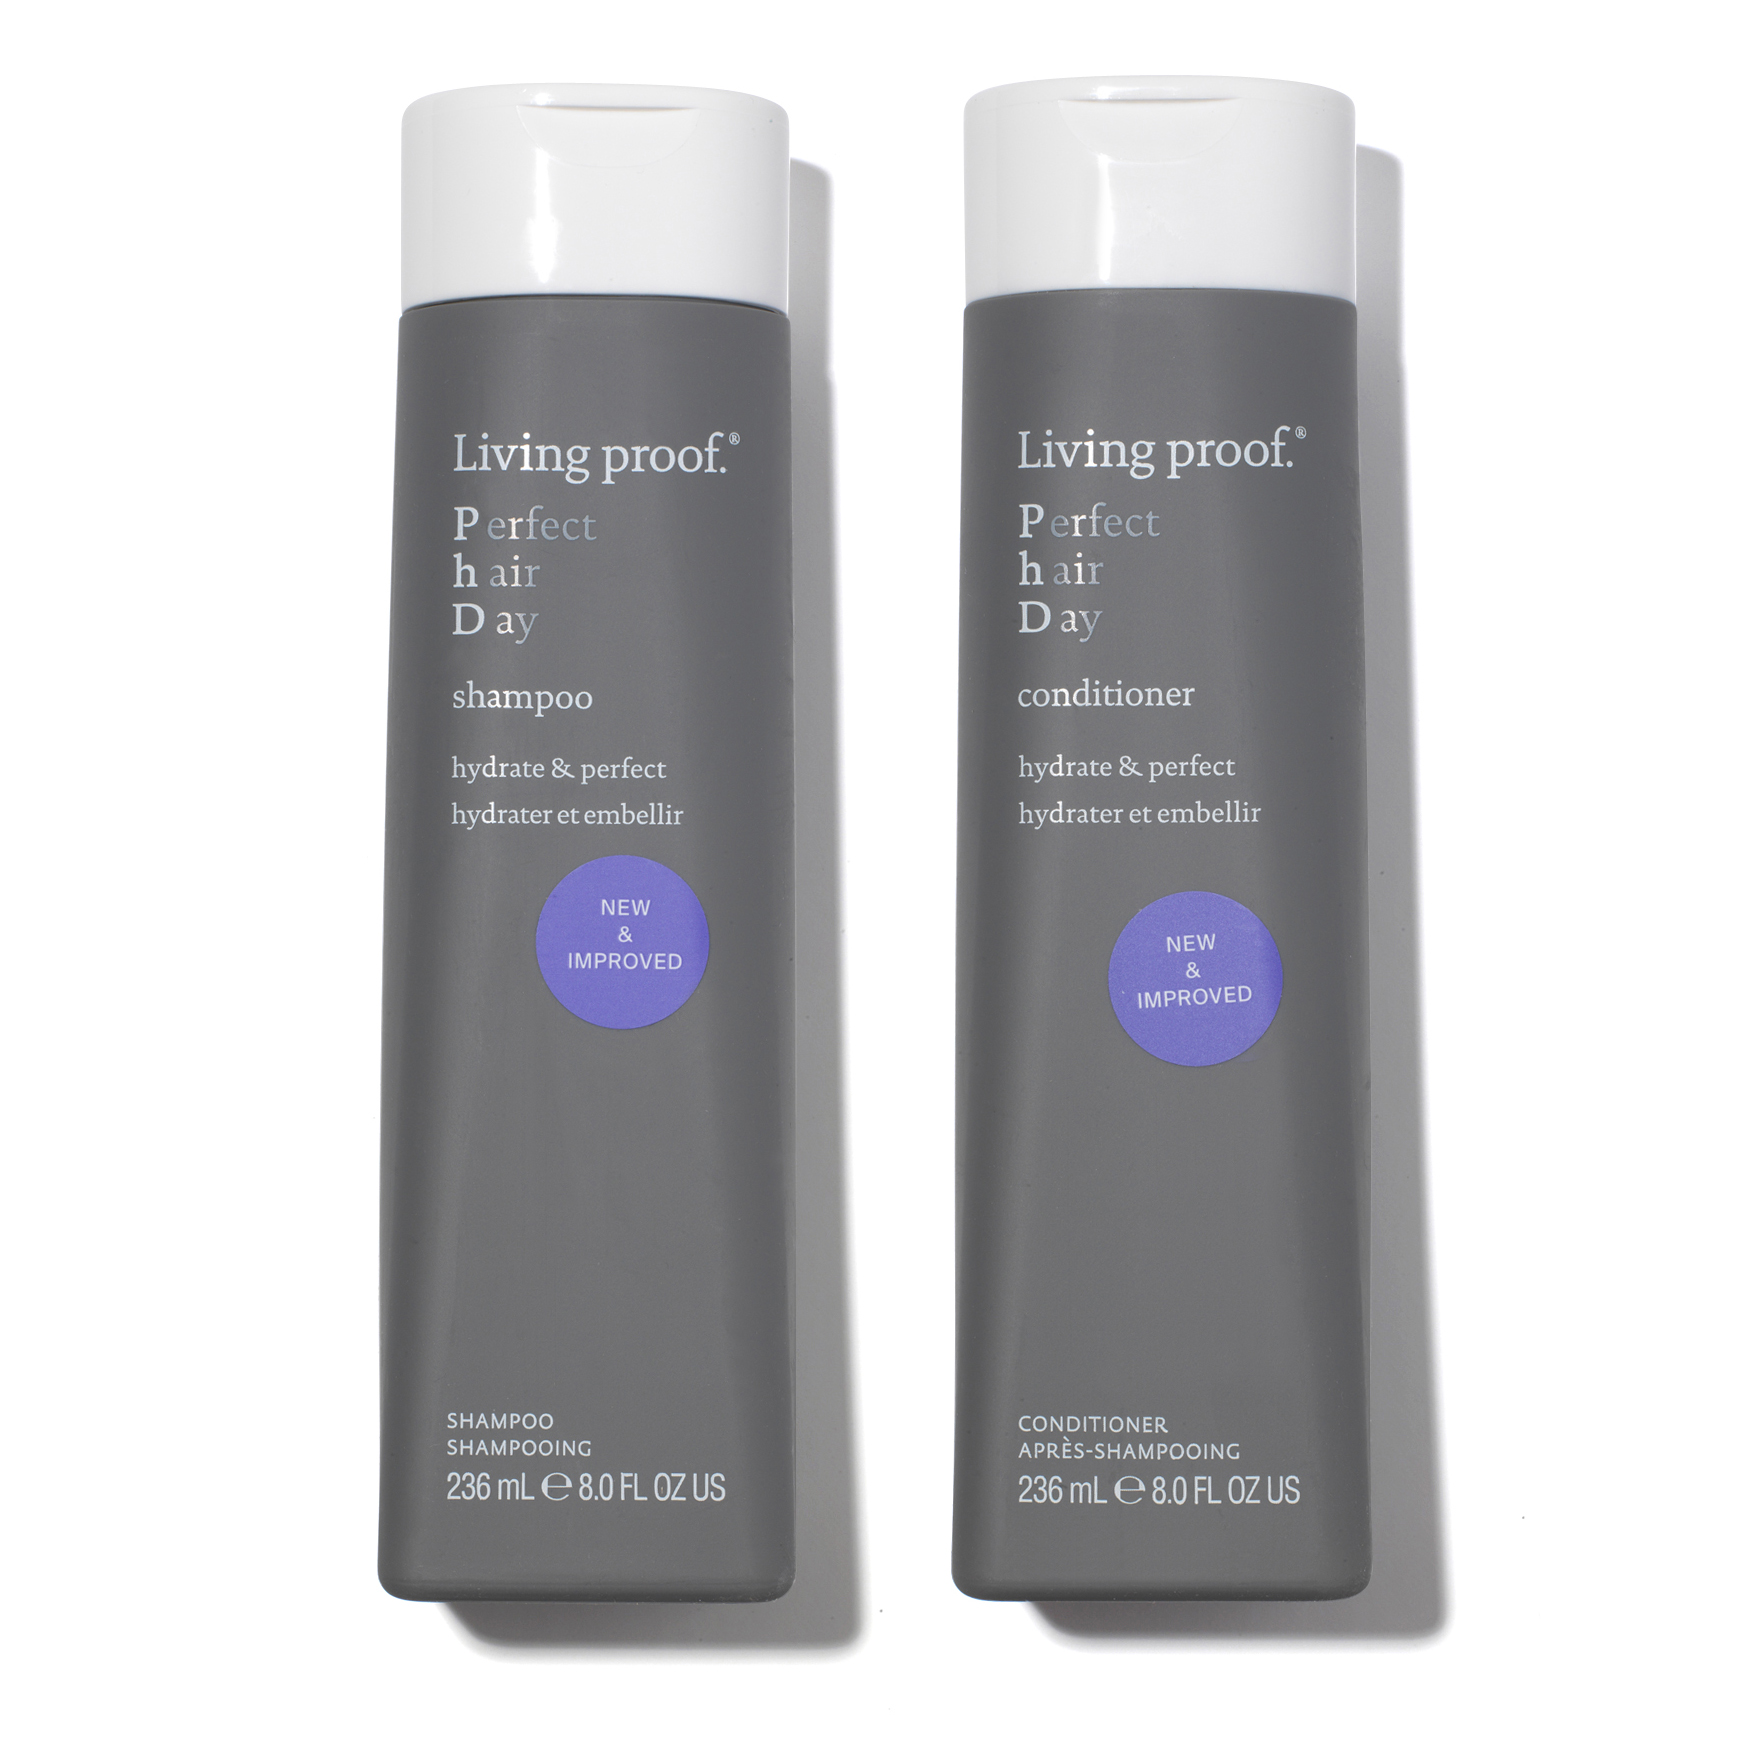 Living Proof PHD Shampoo & Conditioner Bundle | Space NK